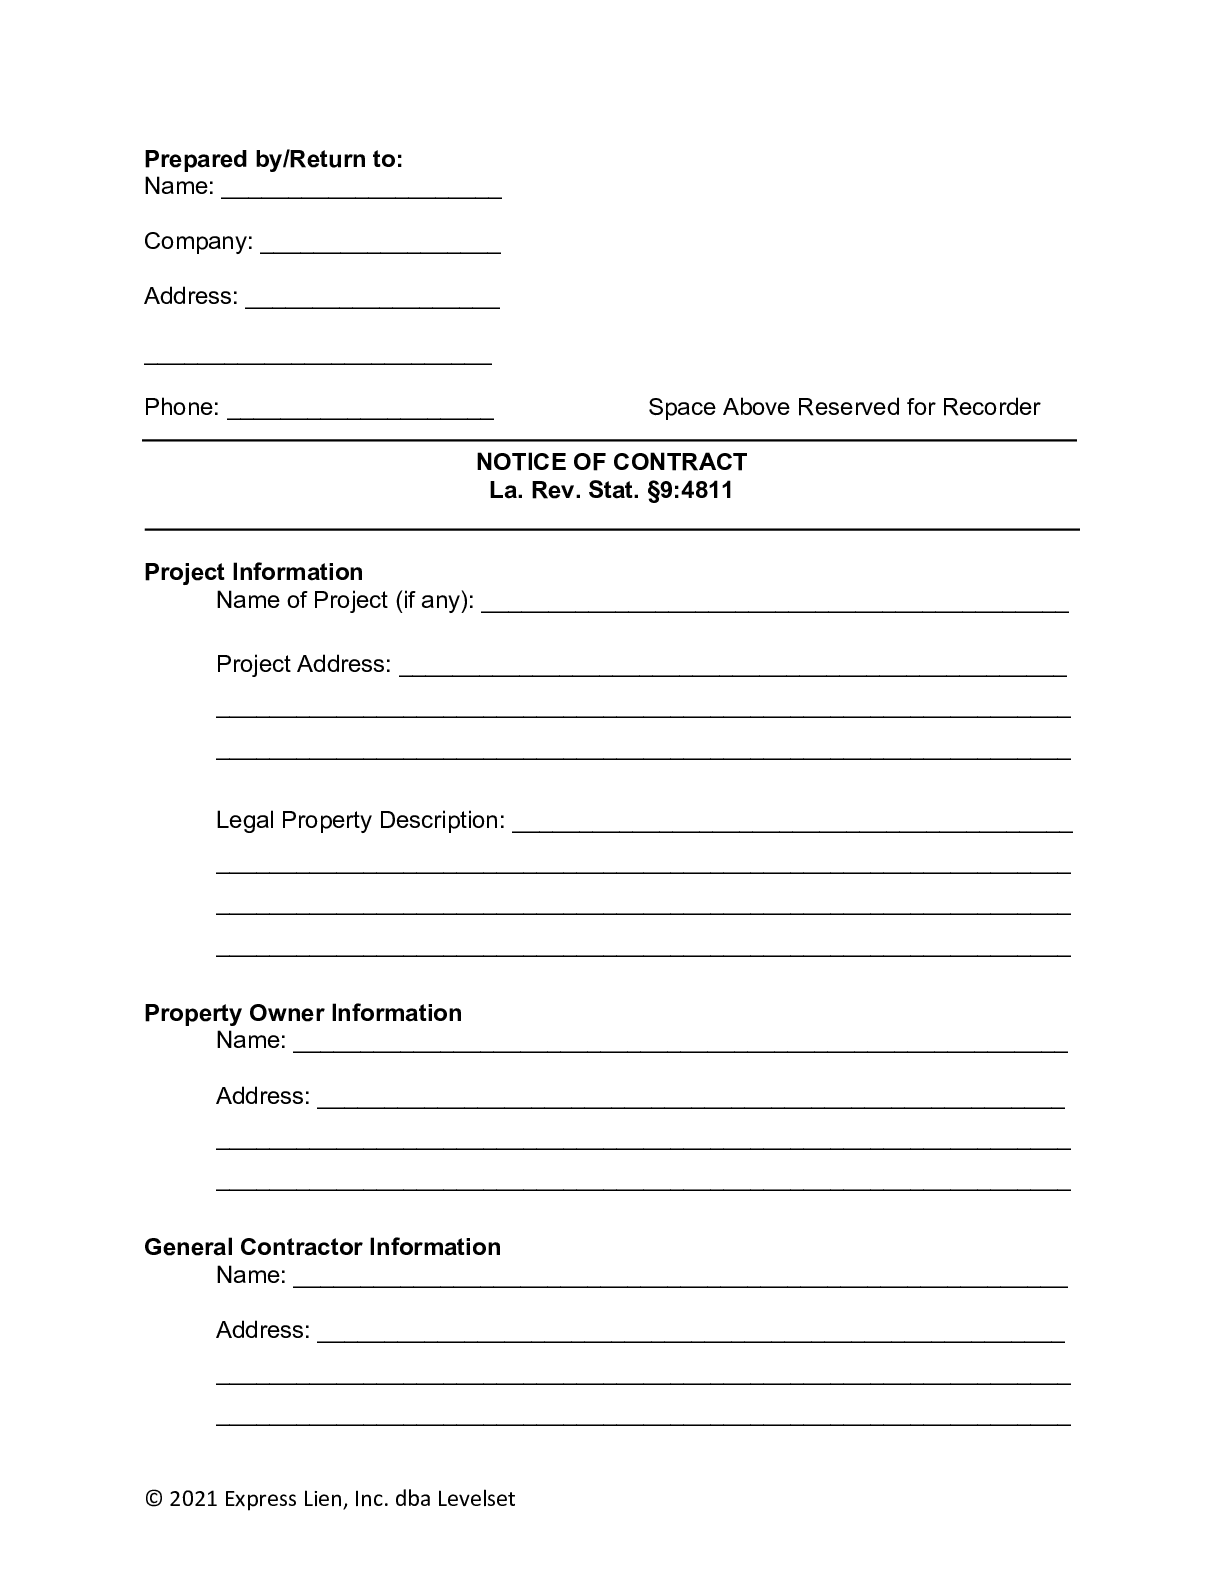 Louisiana Notice of Contract Form - free from